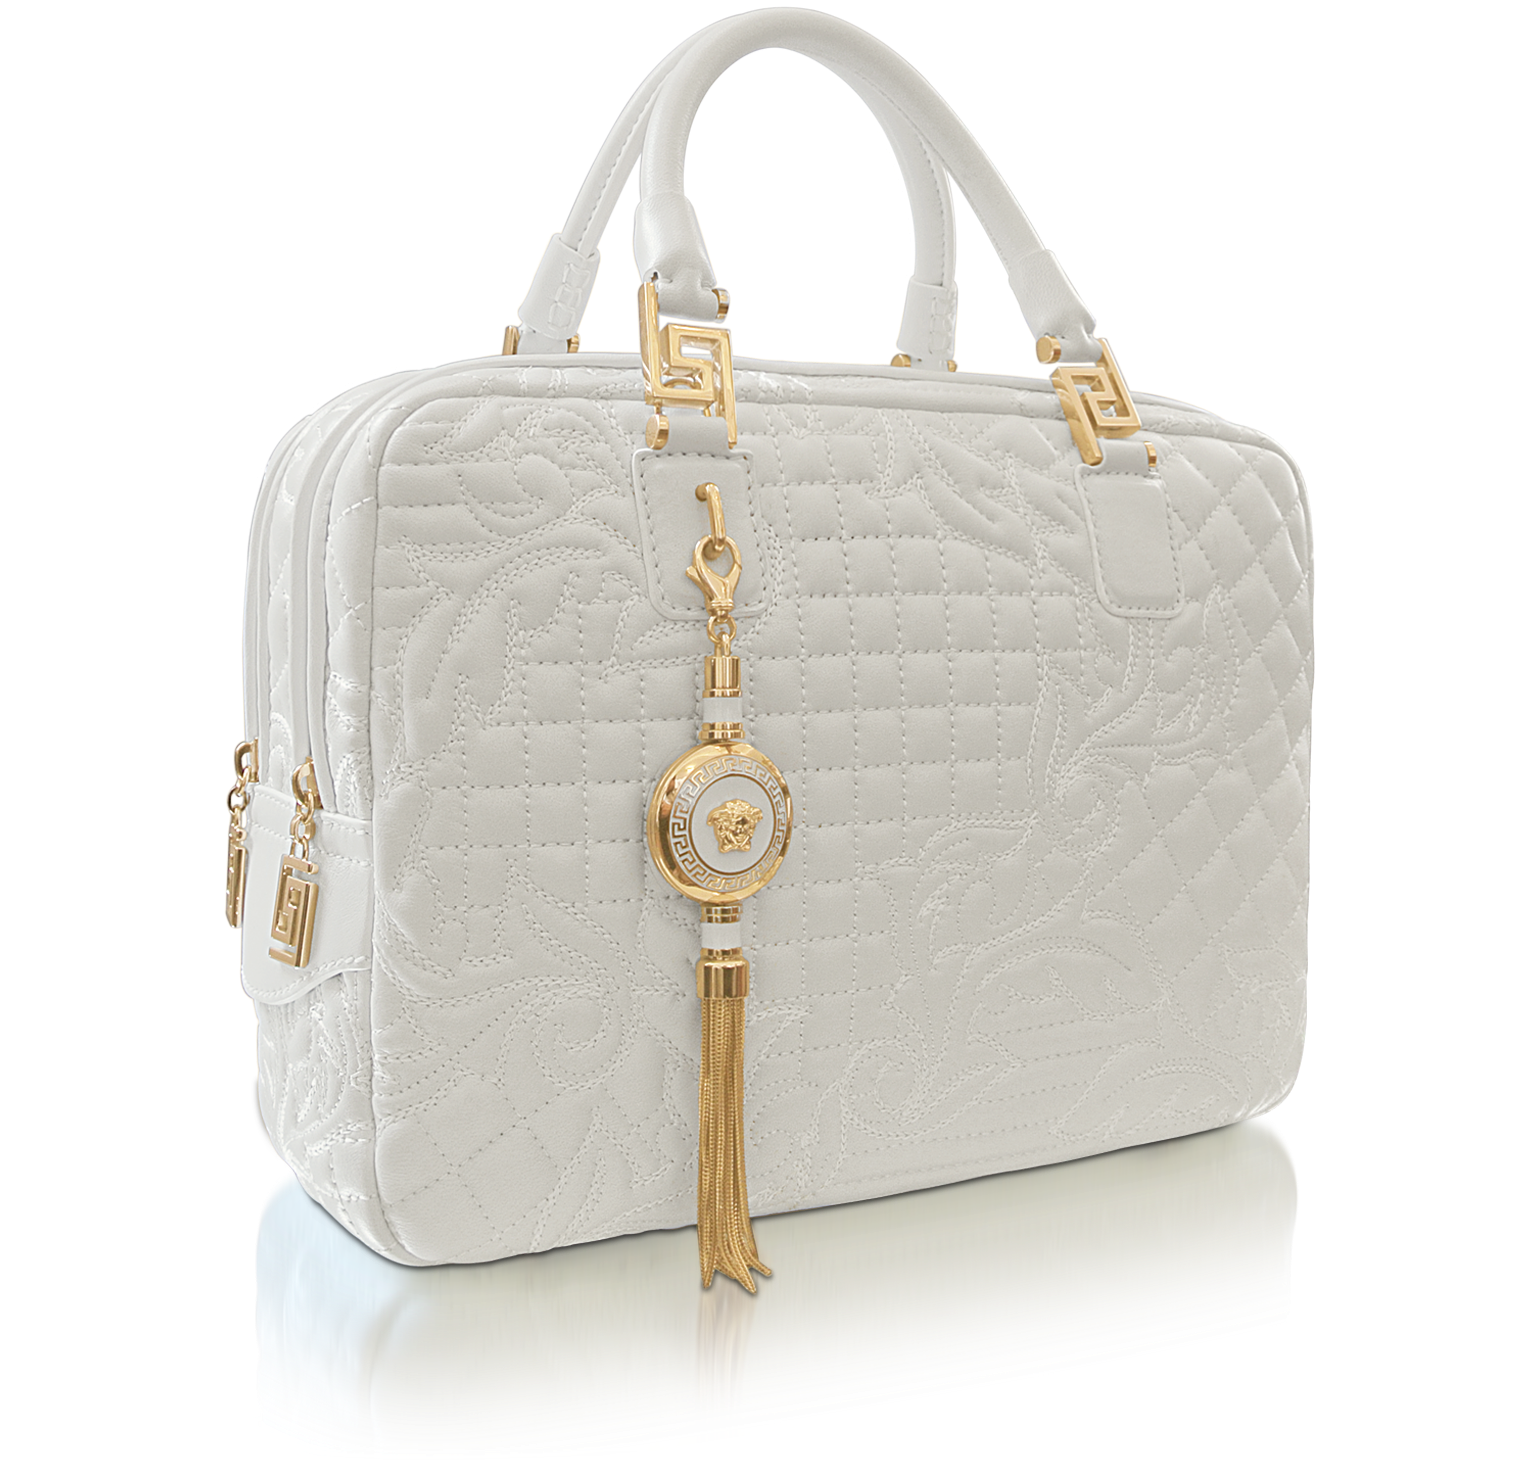 Versace Demetra Vanitas Large White Quilted Leather Satchel at FORZIERI